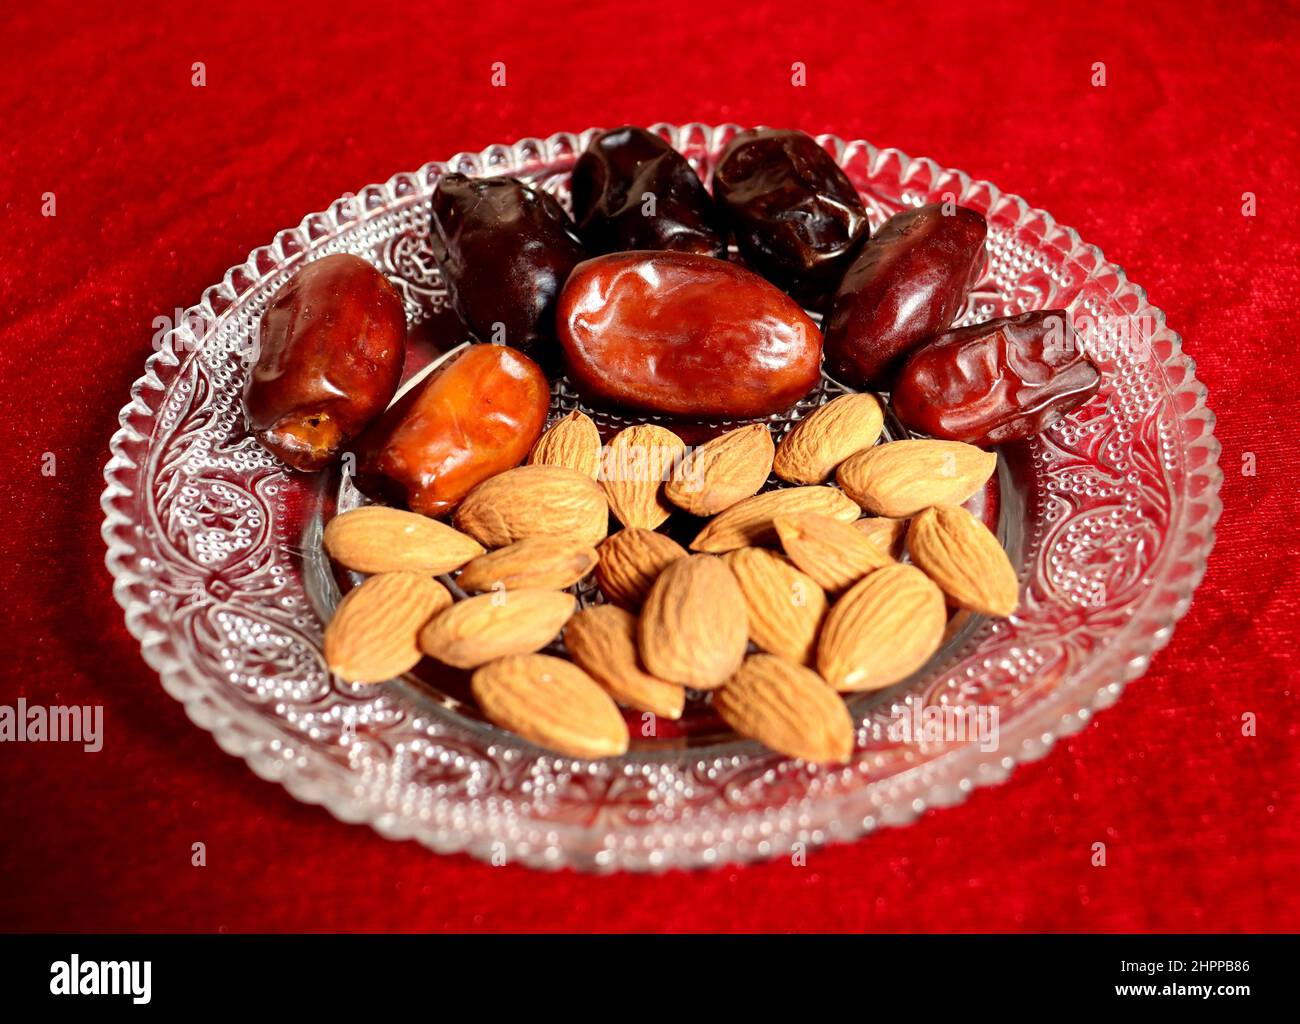 Healthy Dry food for breakfast,Almond and Arabic date on a glass plate with white background,healthy foodwith antioxident Stock Photo